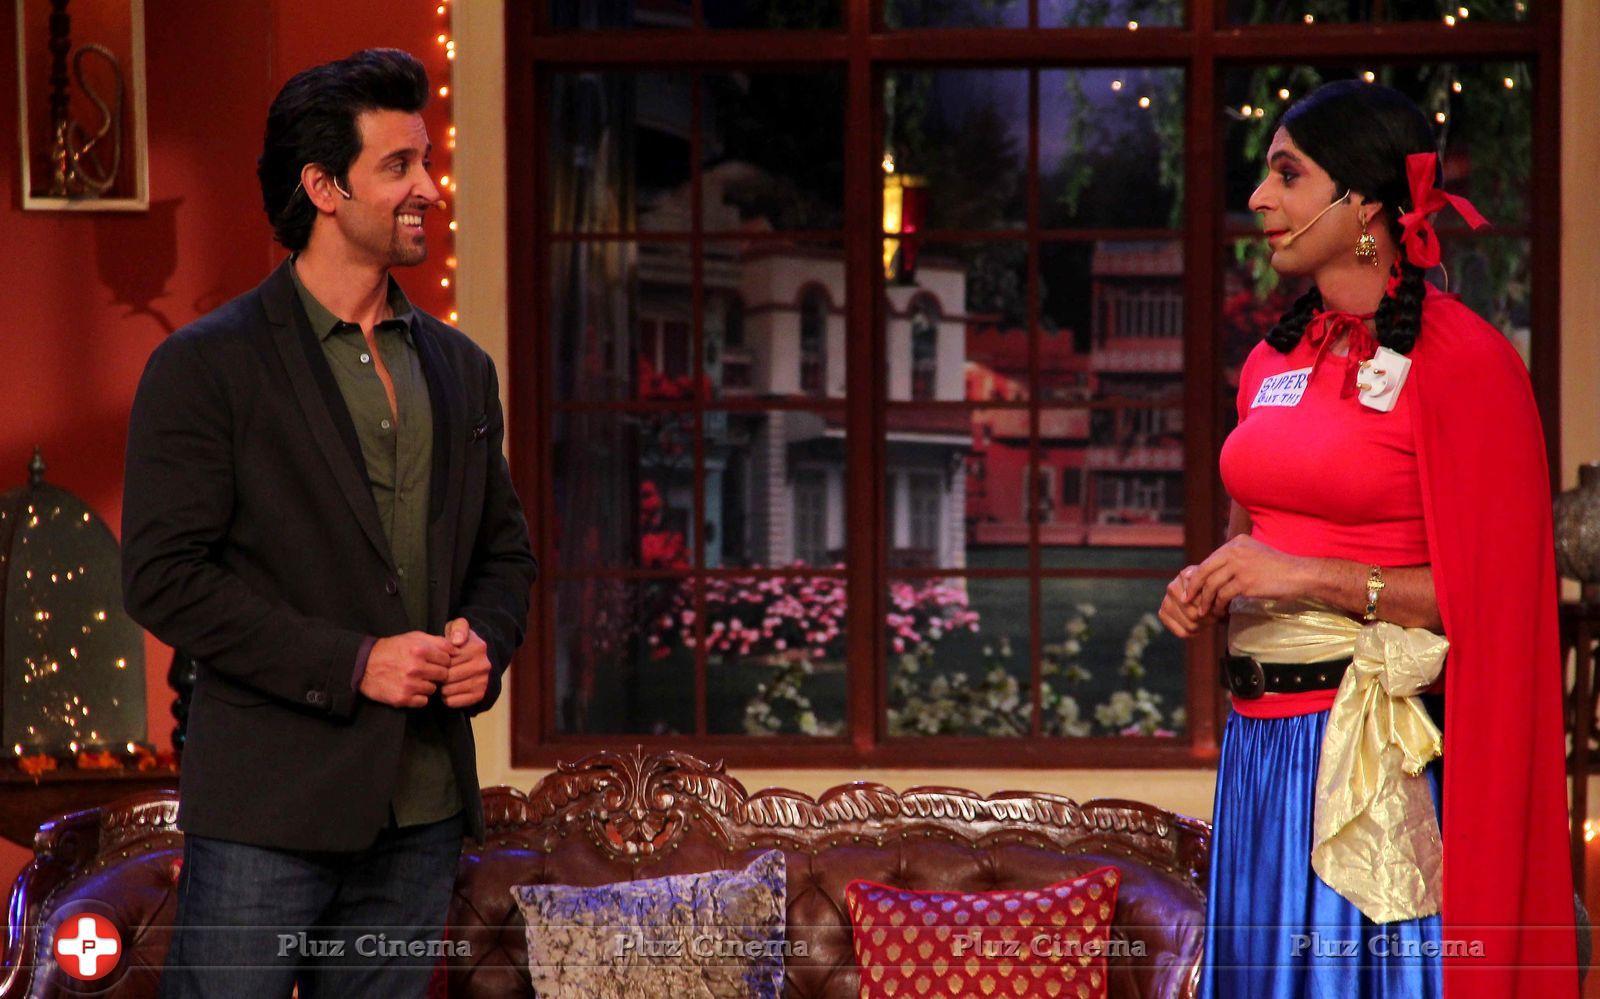 Hrithik Roshan - Hrithik Roshan Promotes Krrish 3 On the Sets Of Comedy Nights With Kapil Photos | Picture 611866